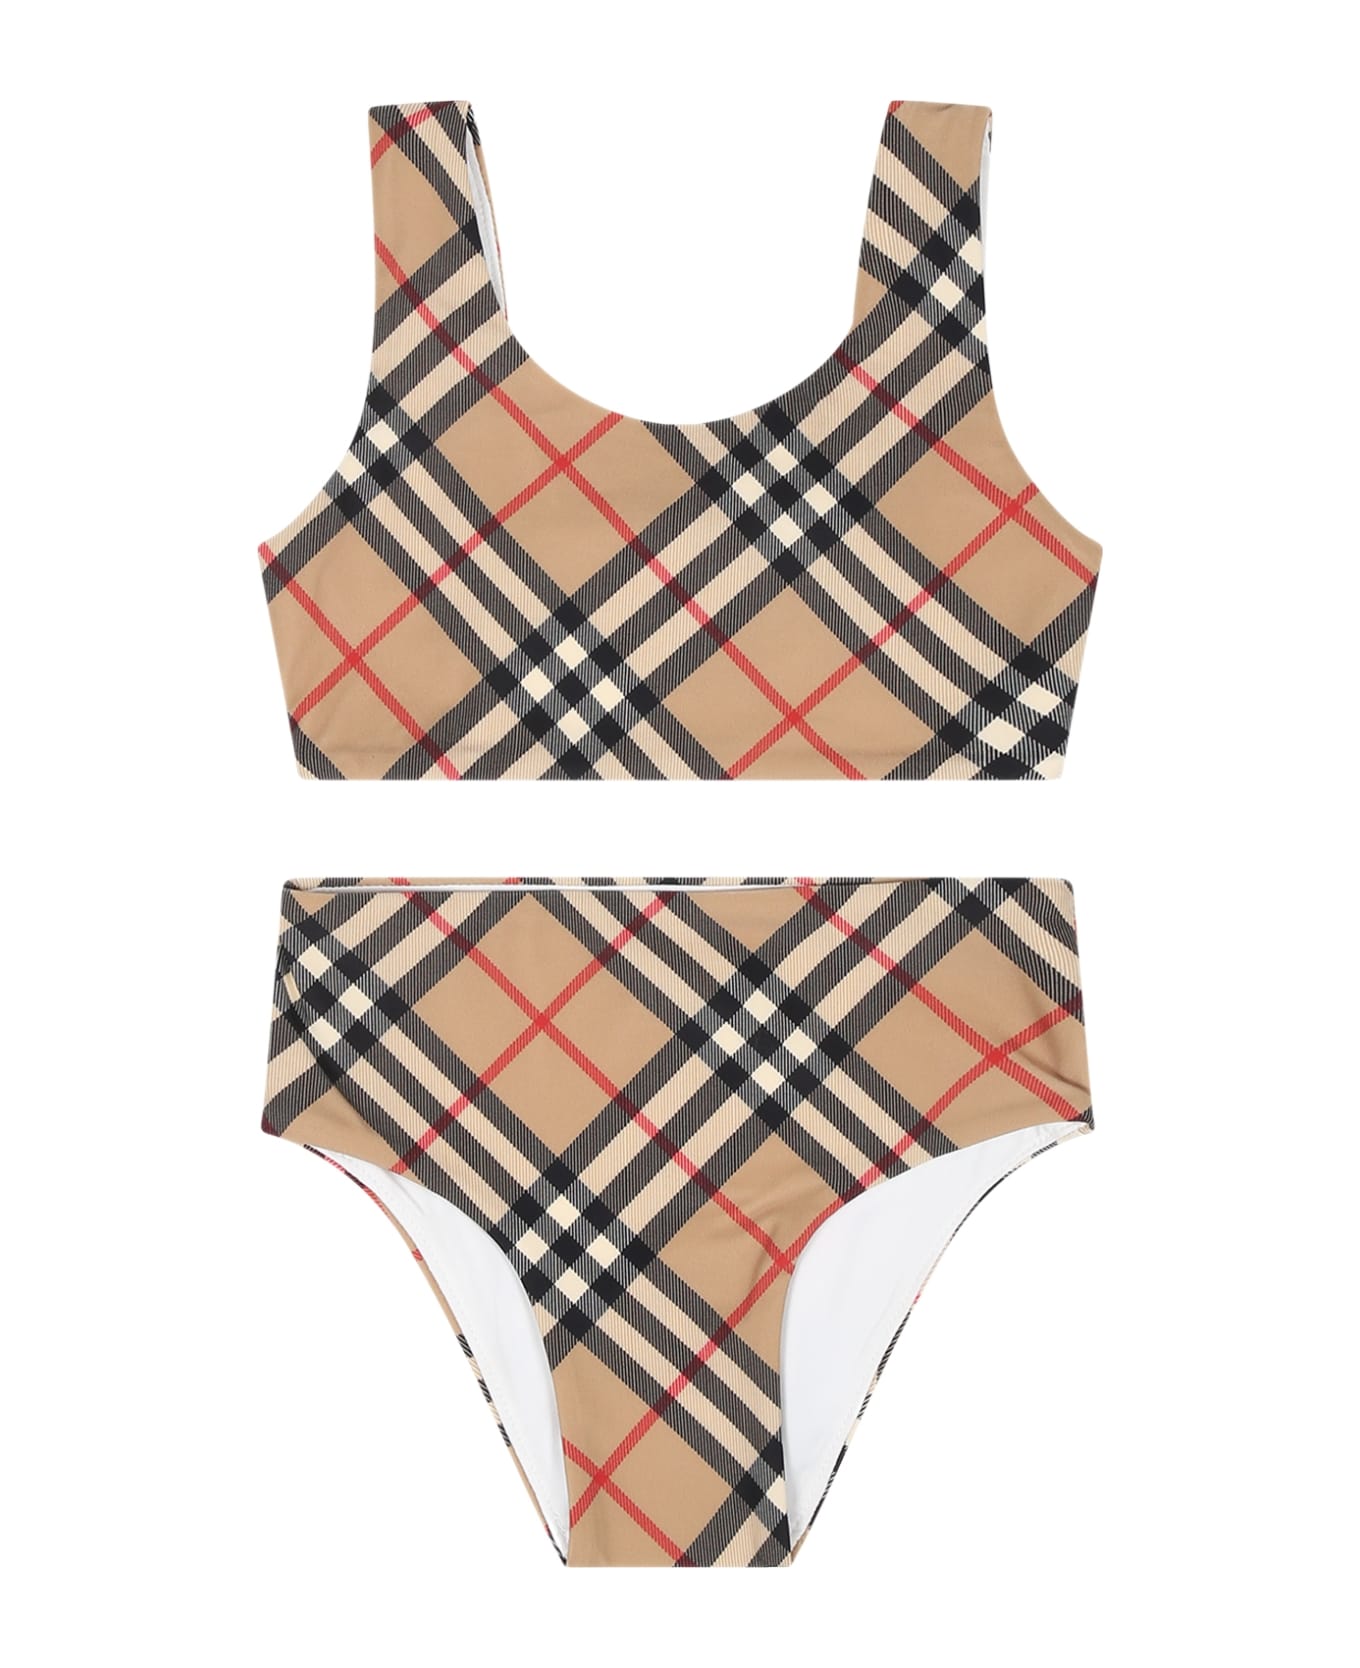 Burberry Beige Bikini For Baby Girl With Vintage Check - Beige